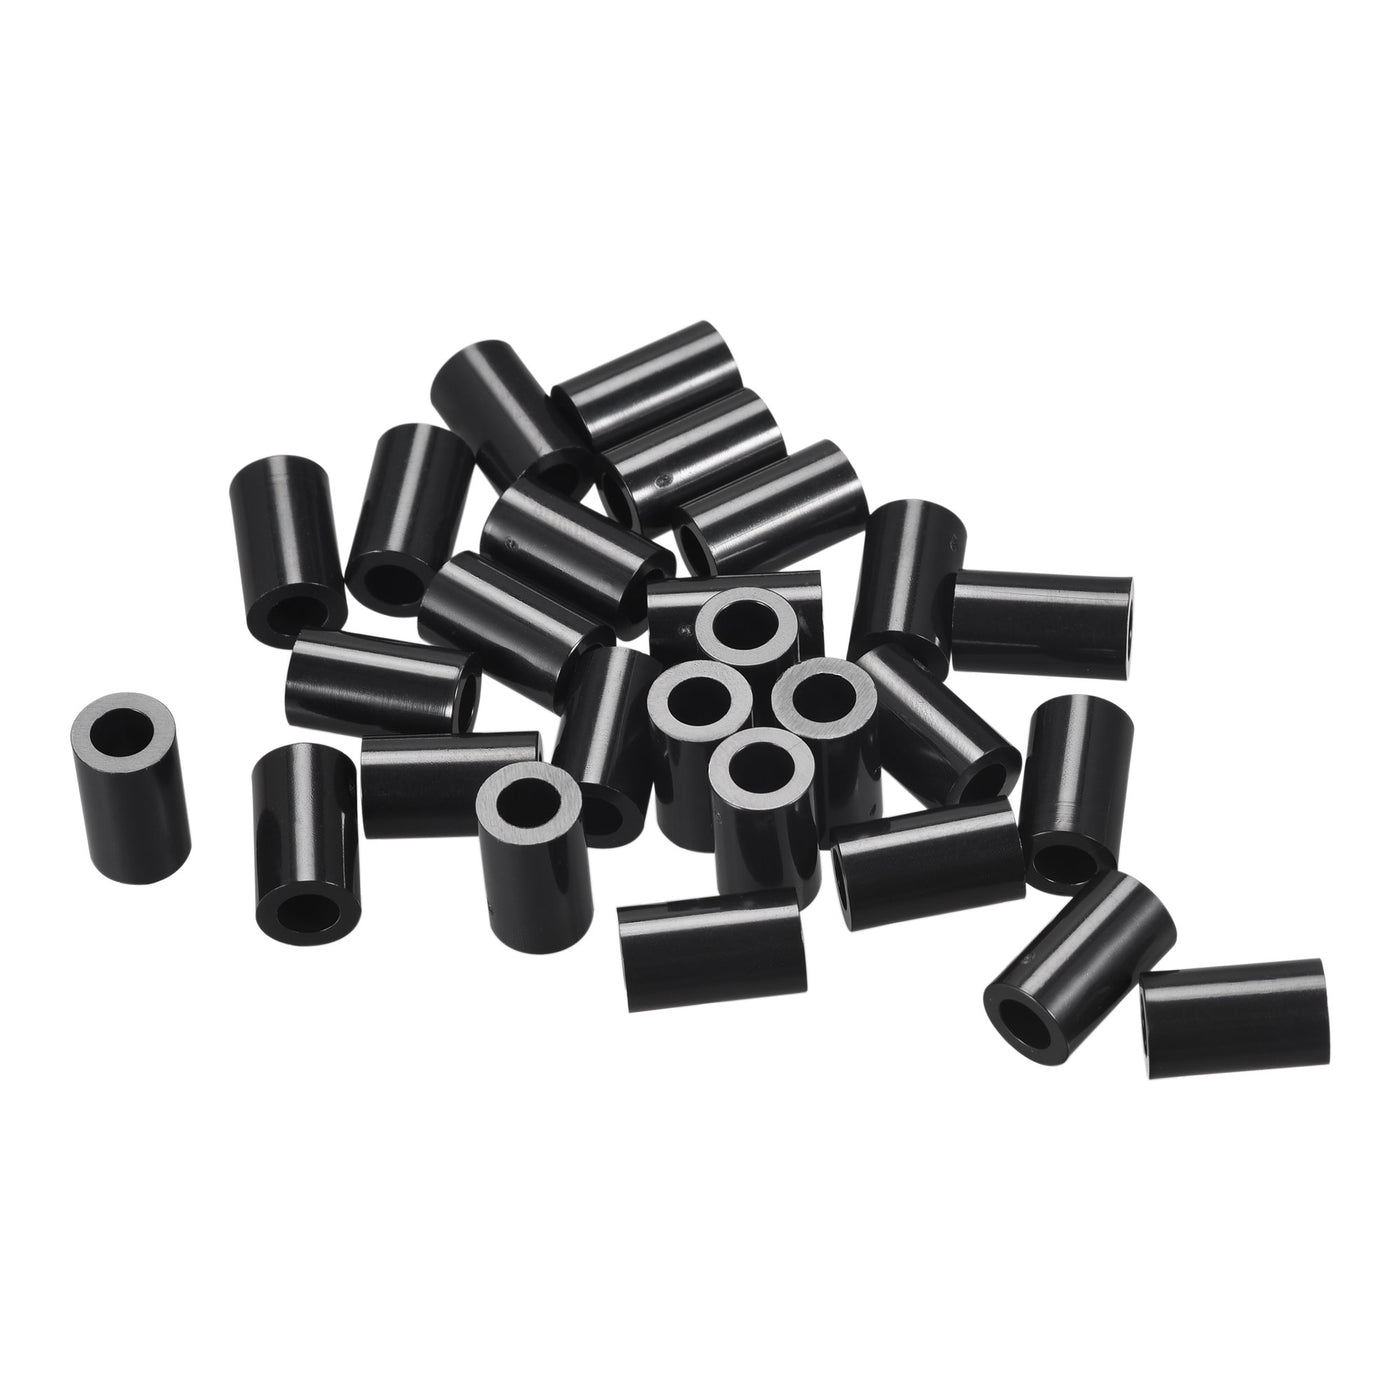 Uxcell Uxcell ABS Round Spacer Washer ID 4.2mm OD 7mm L 25mm for M4 Screws, Black, 200Pcs